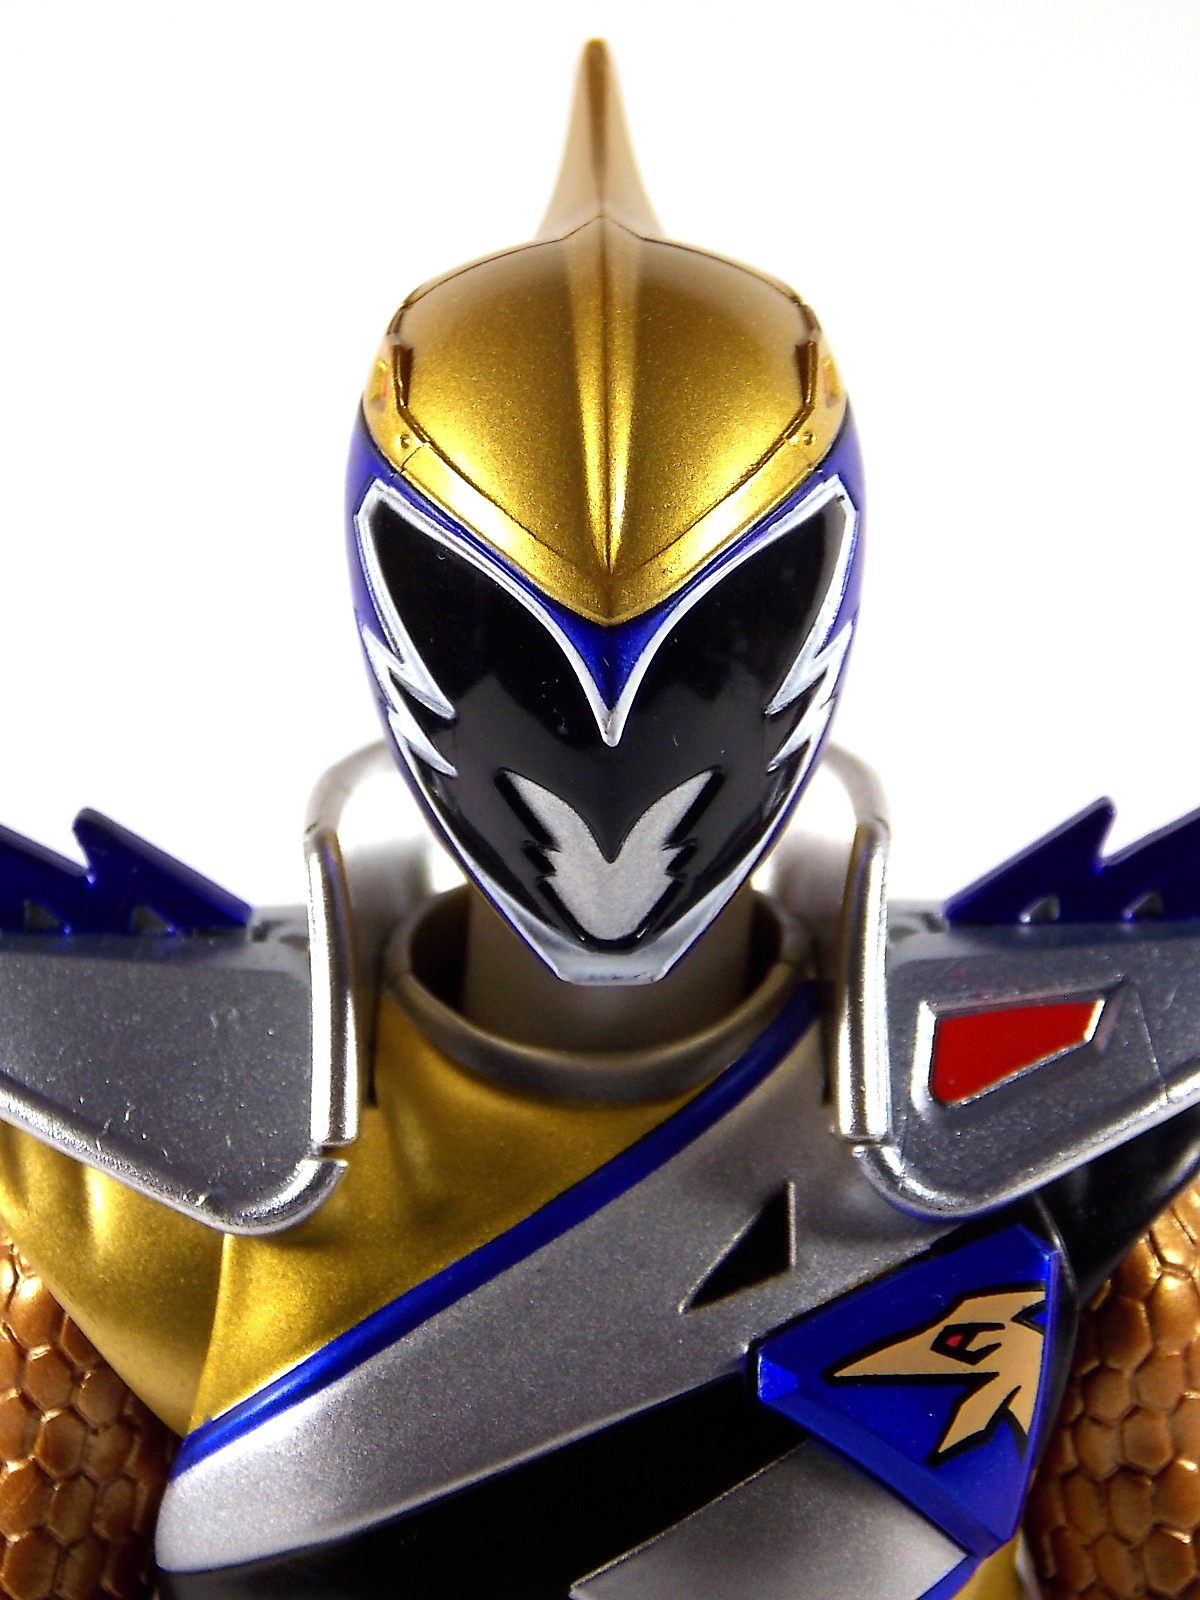 S.H. Figuarts Kyoryu Gold Gallery - Tokunation